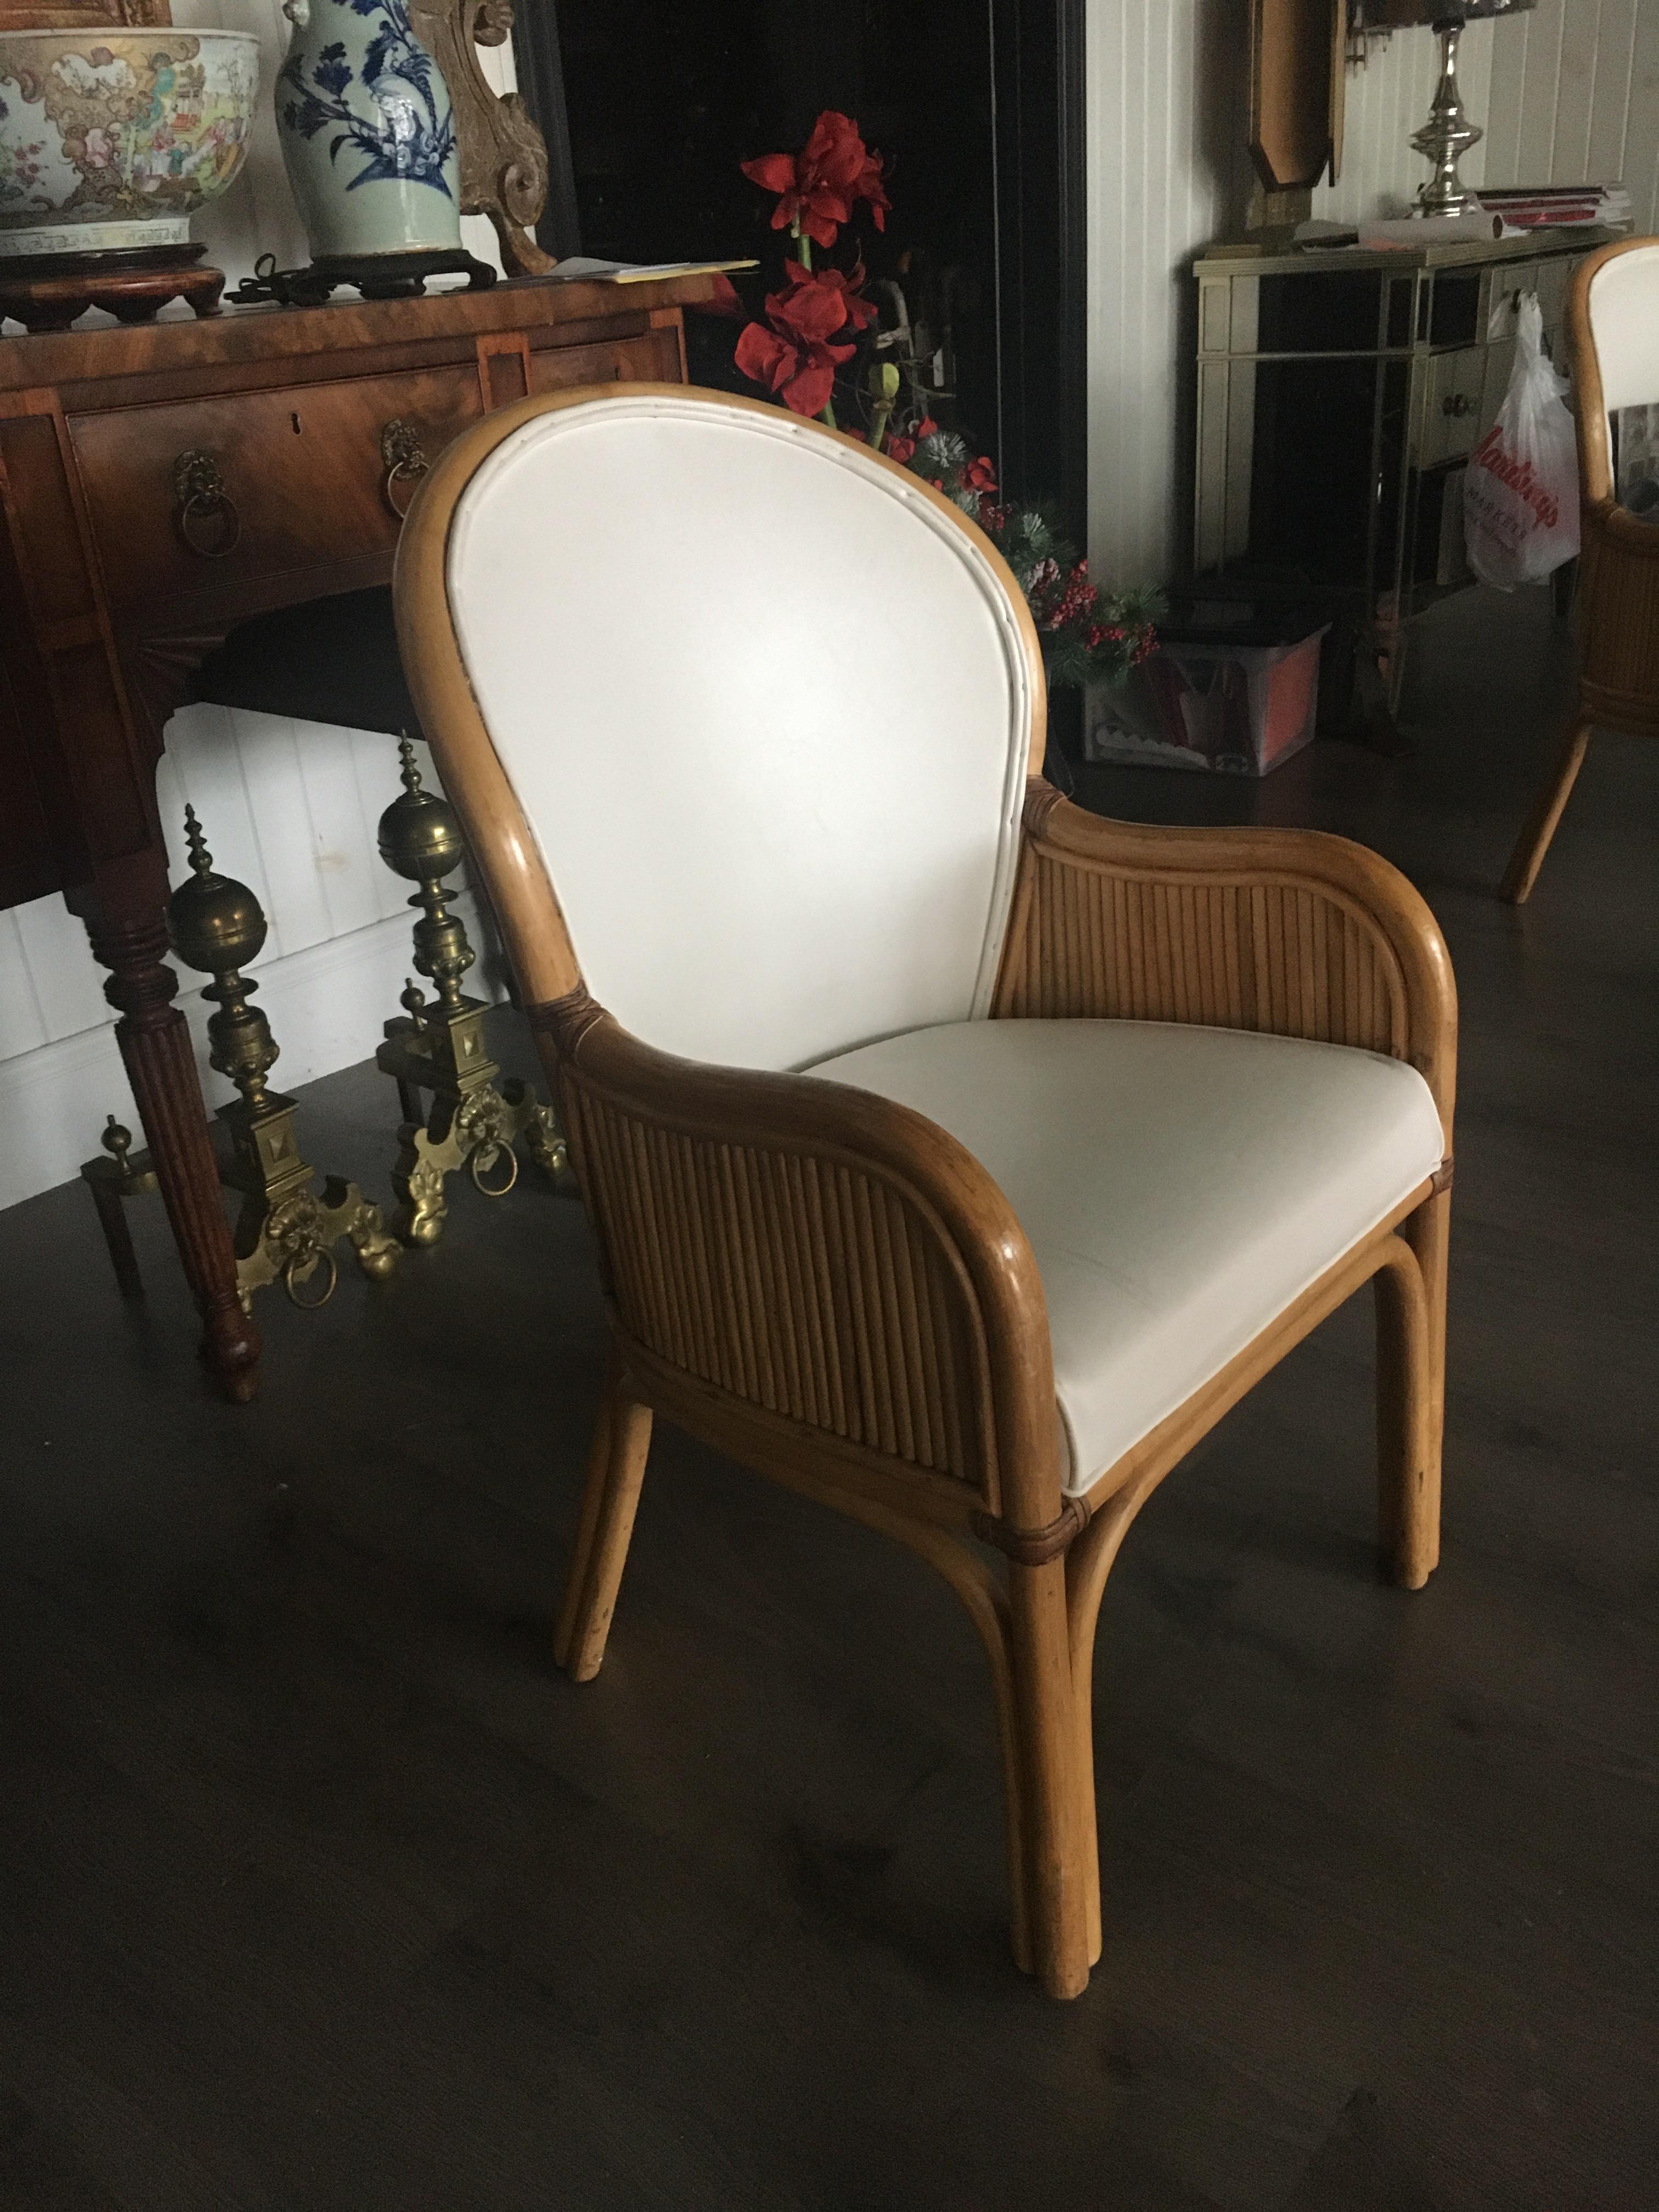 Set Of Ten Rattan frame chairs with white upholstery. Rattan frame chairs with white
upholstery In the style of McQuire.  We also have a large selection of mid century chairs, feel free to call or email with questions.
